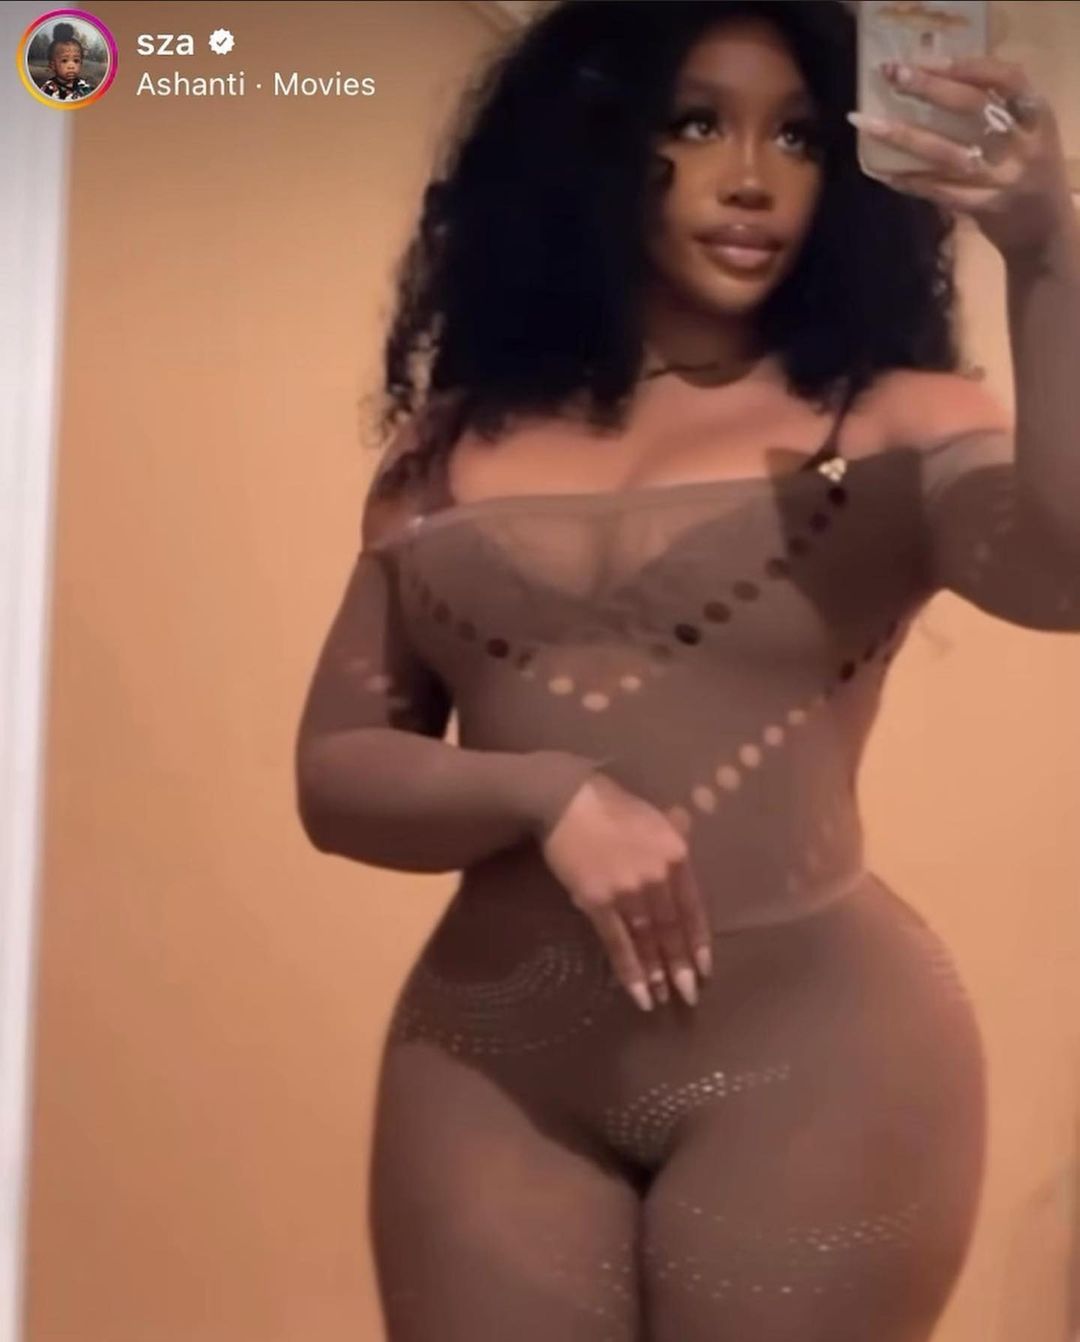 SZA WEARS THE PEARL BODYSUIT IN KAHLUA BROWN ALONG WITH THE MAIA PANTS IN KAHLUA BROWN